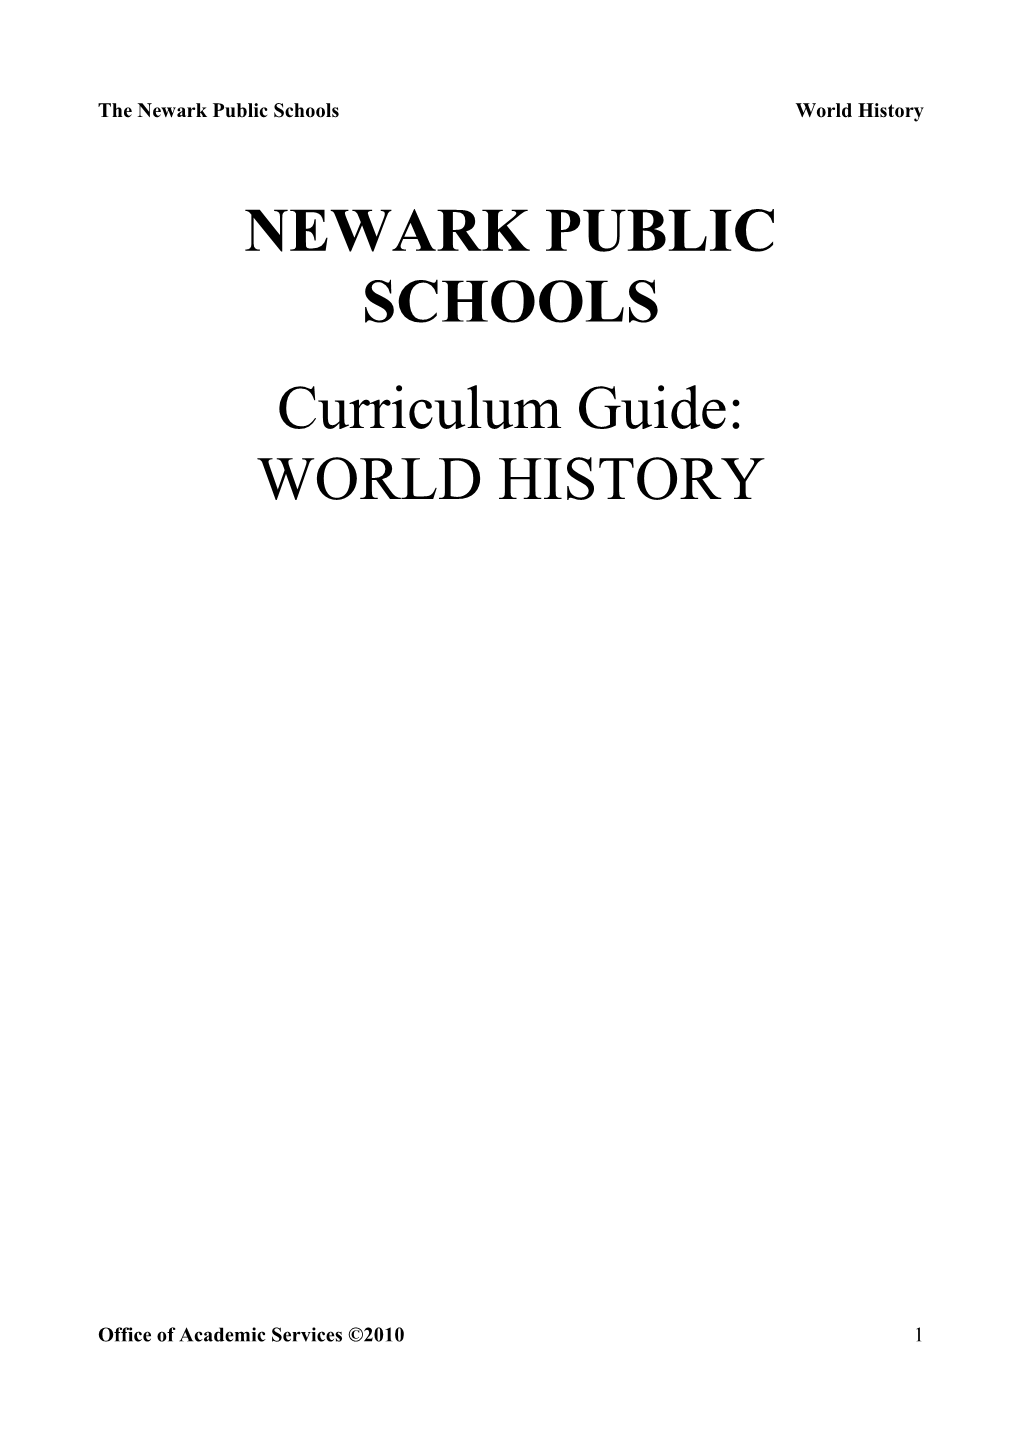 Curriculum-New-Page s1